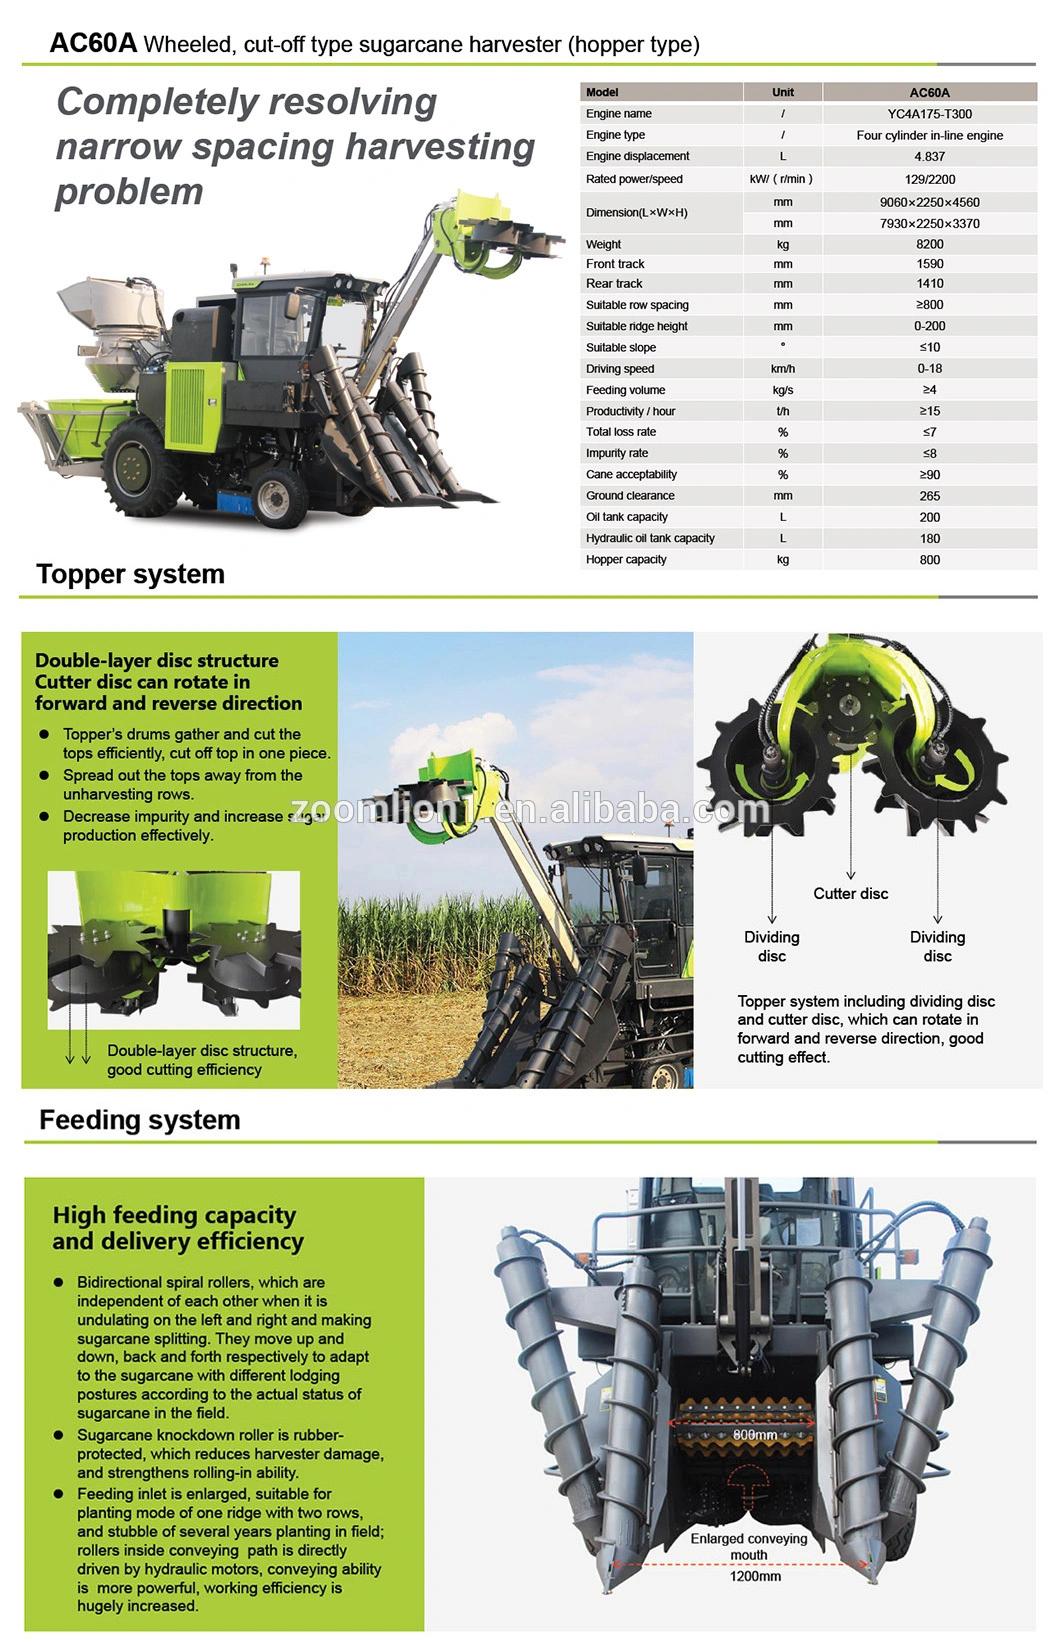 Zoomlion Combine AC60A Sugarcane Harvester Cutting Machinery